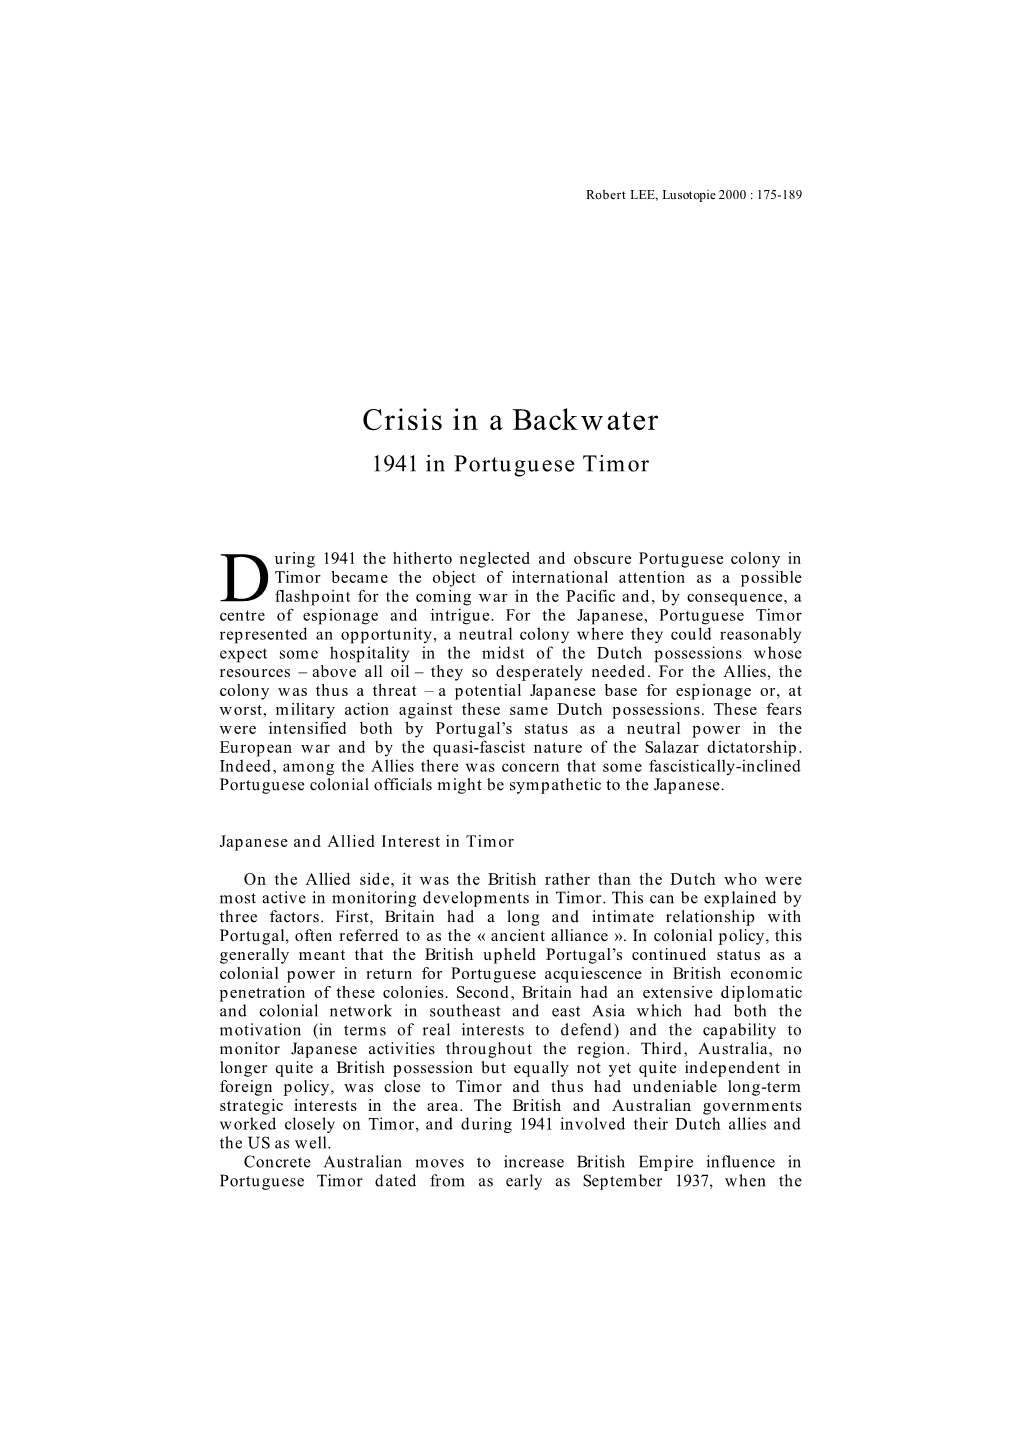 Crisis in a Backwater 1941 in Portuguese Timor